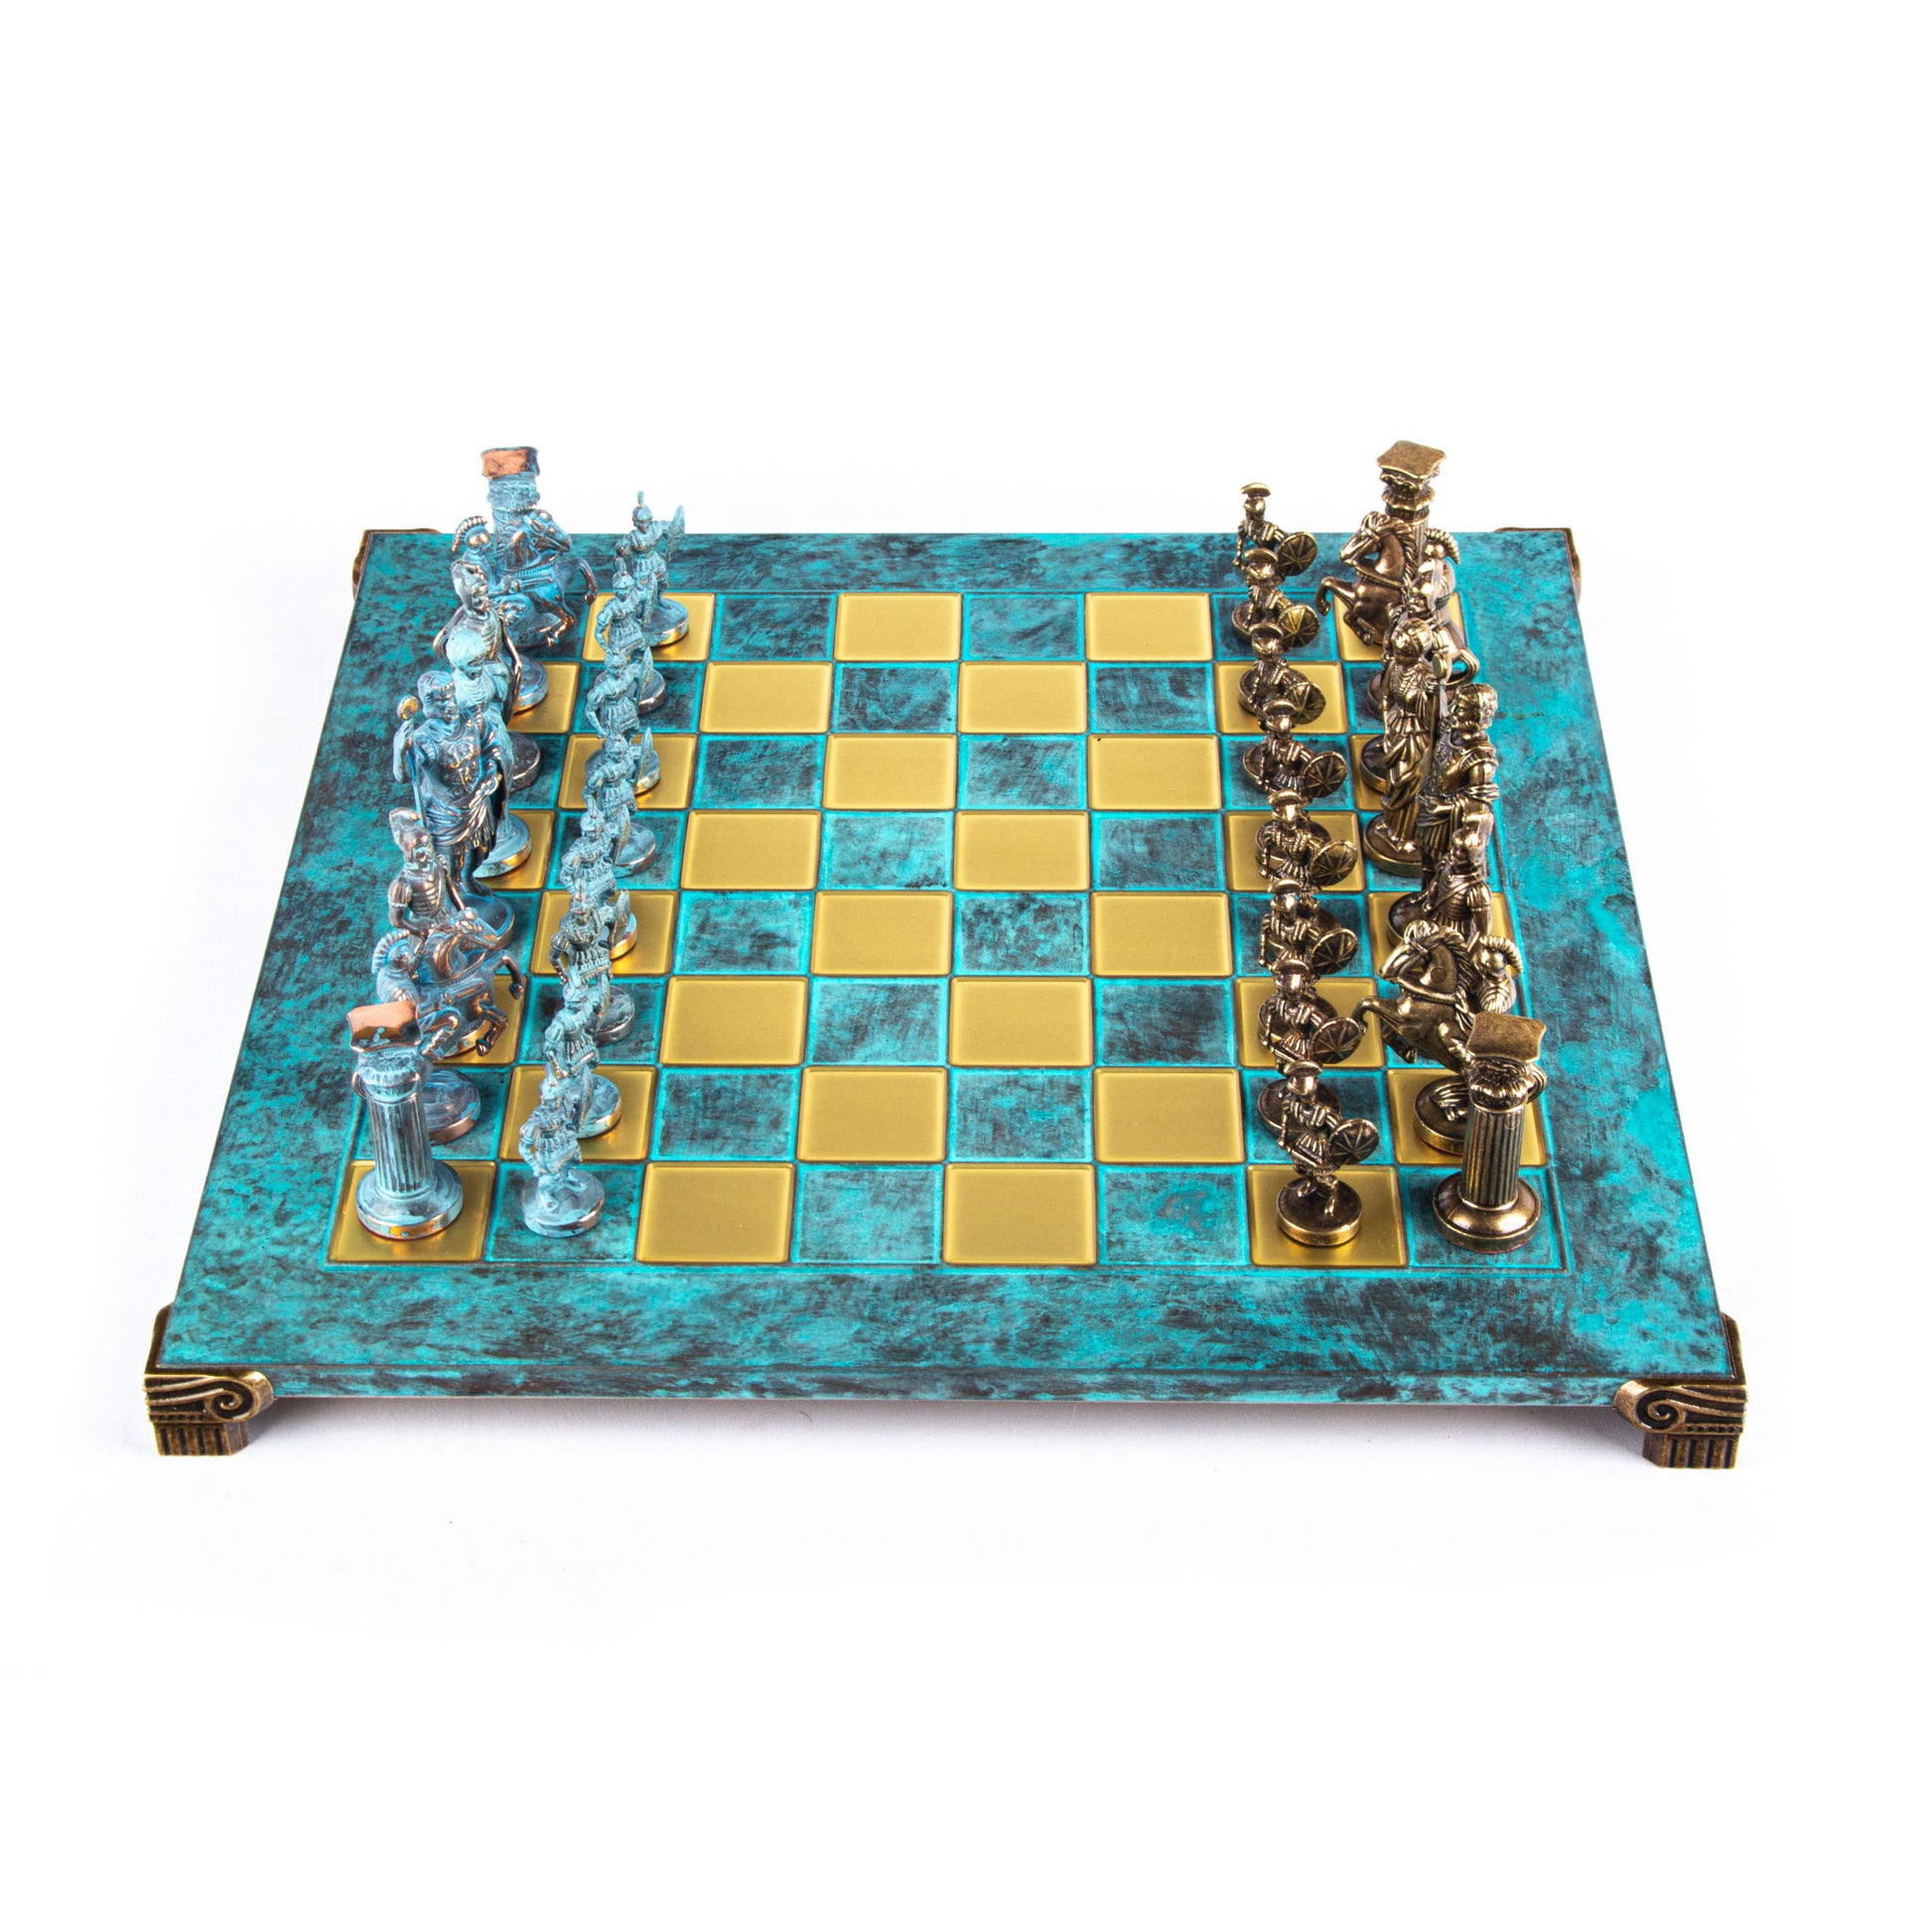 GREEK ROMAN PERIOD CHESS SET with blue/brown chessmen and bronze chessboard 44 x 44cm (Large) - Premium Chess from MANOPOULOS Chess & Backgammon - Just €275! Shop now at MANOPOULOS Chess & Backgammon